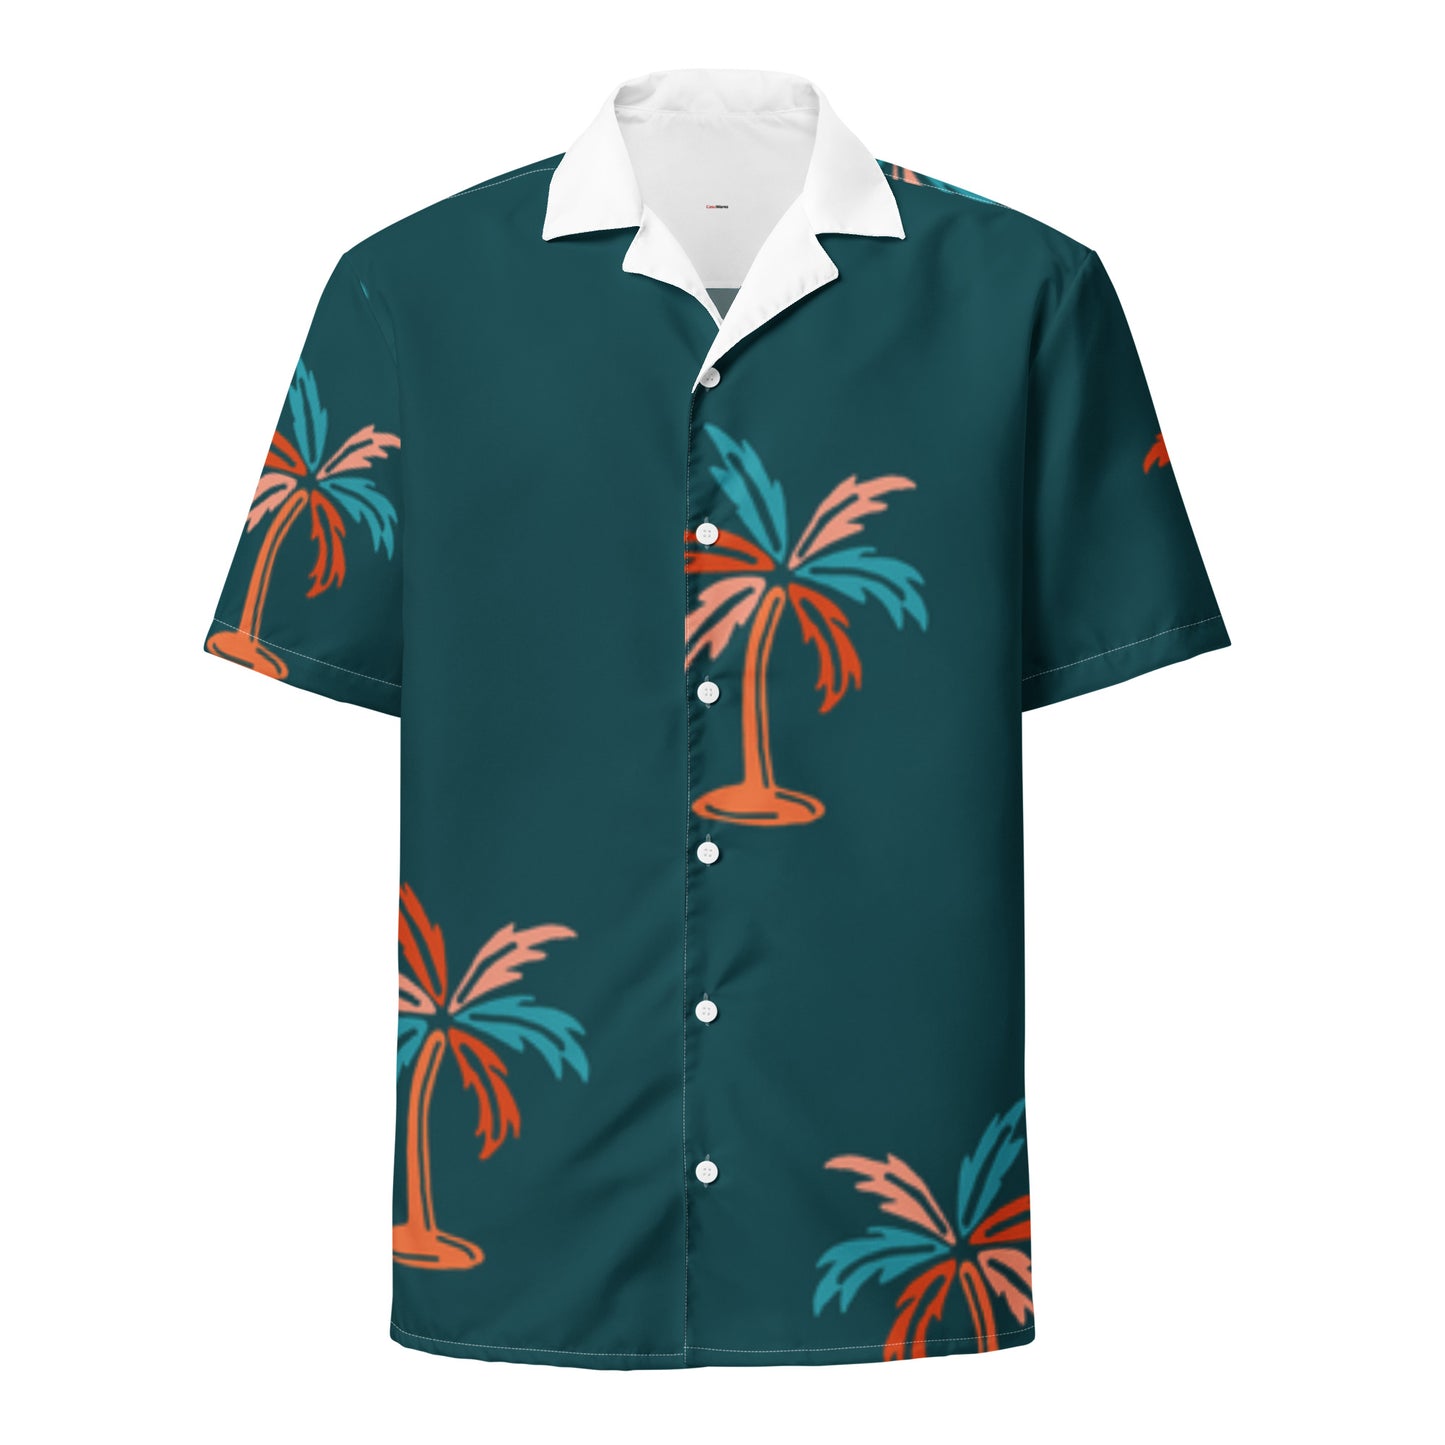 Men's UPF 50+ Tropical Protection Recycled Button Shirt